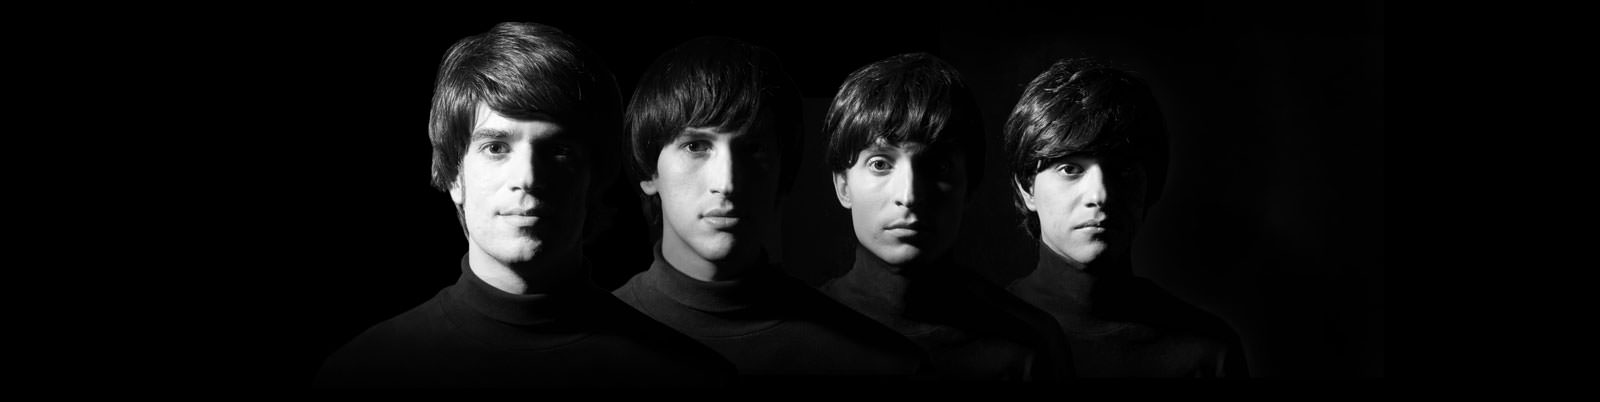 The-Beatles-Cover-The-Beetles-One-Release